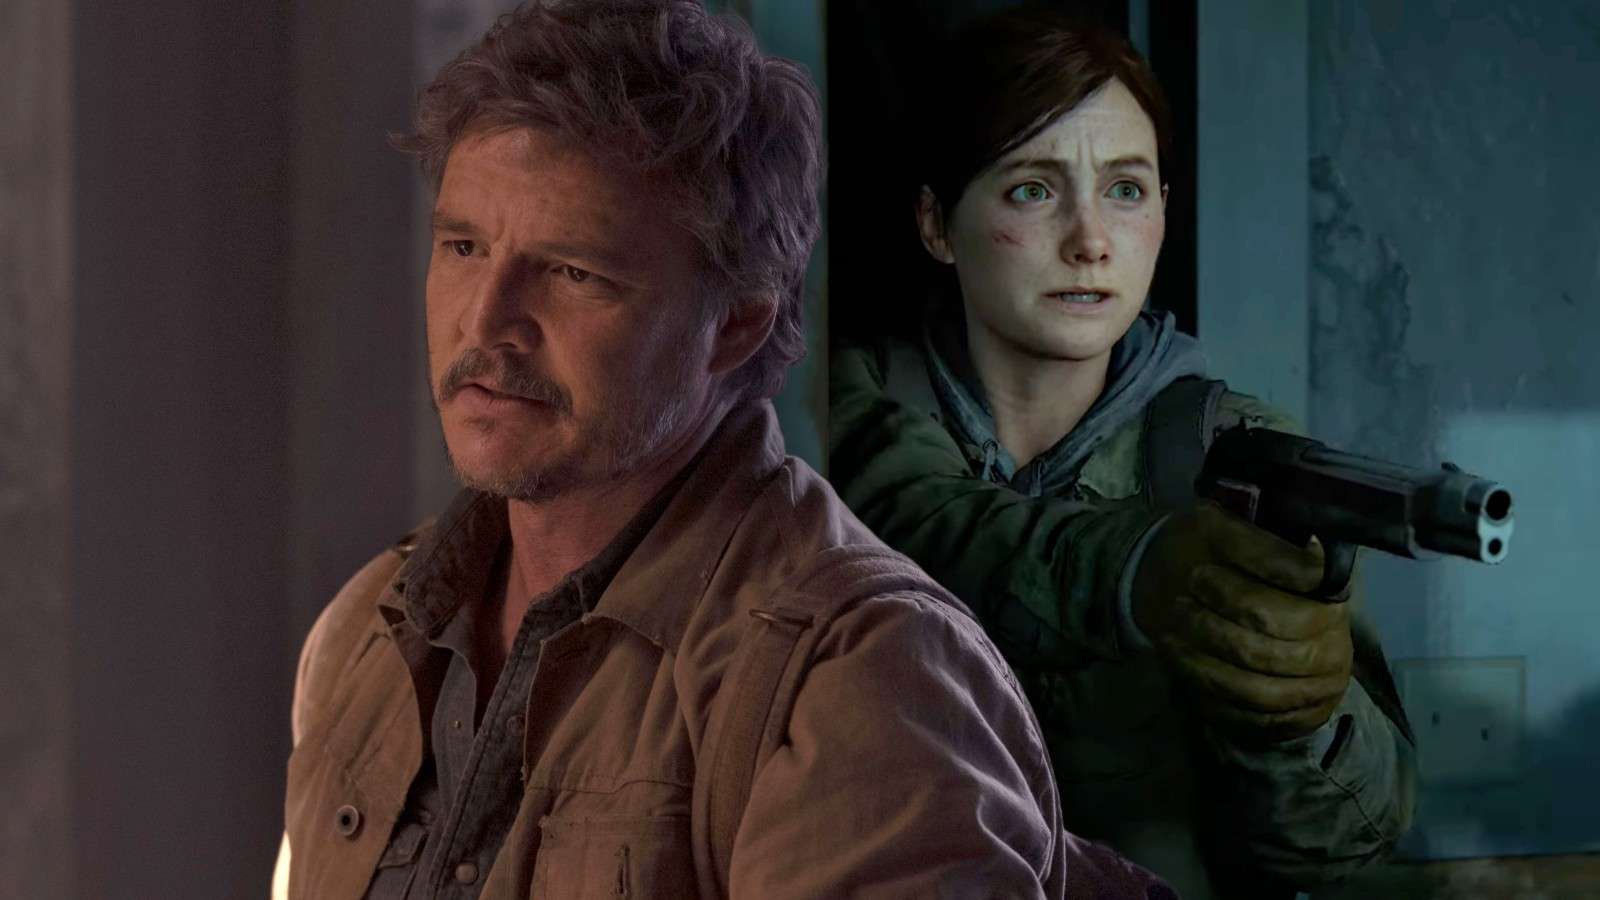 Pedro Pascal as Joel in The Last of Us and Ellie in Part II